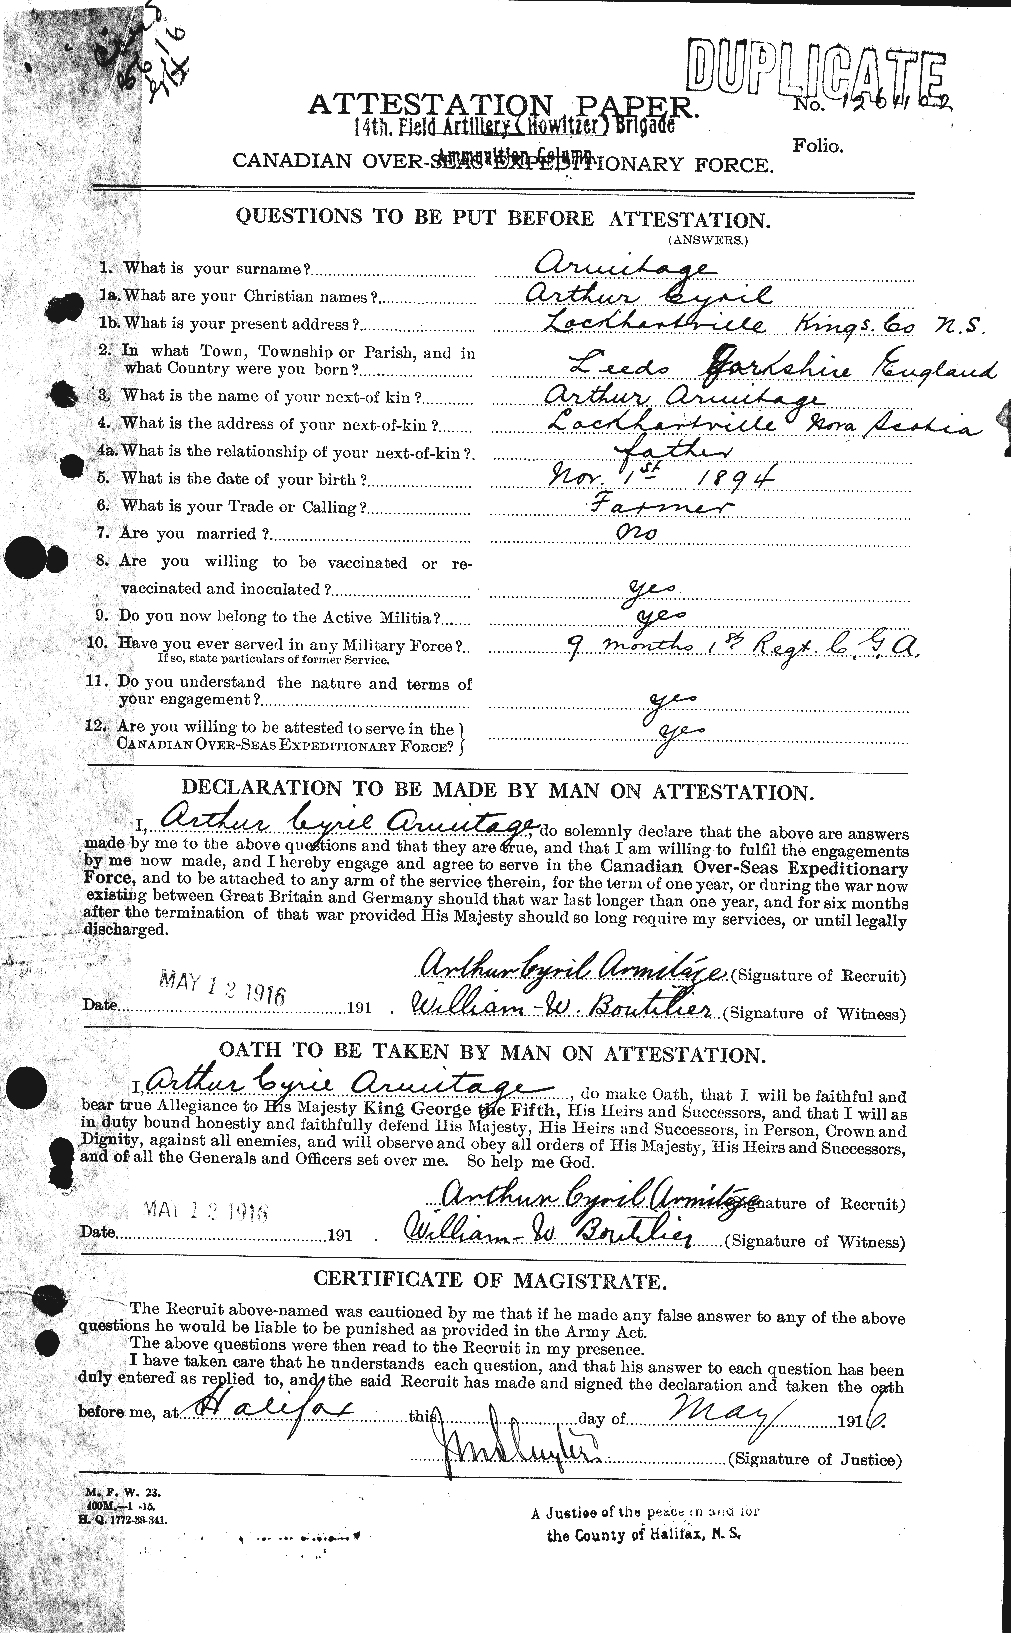 Personnel Records of the First World War - CEF 213439a